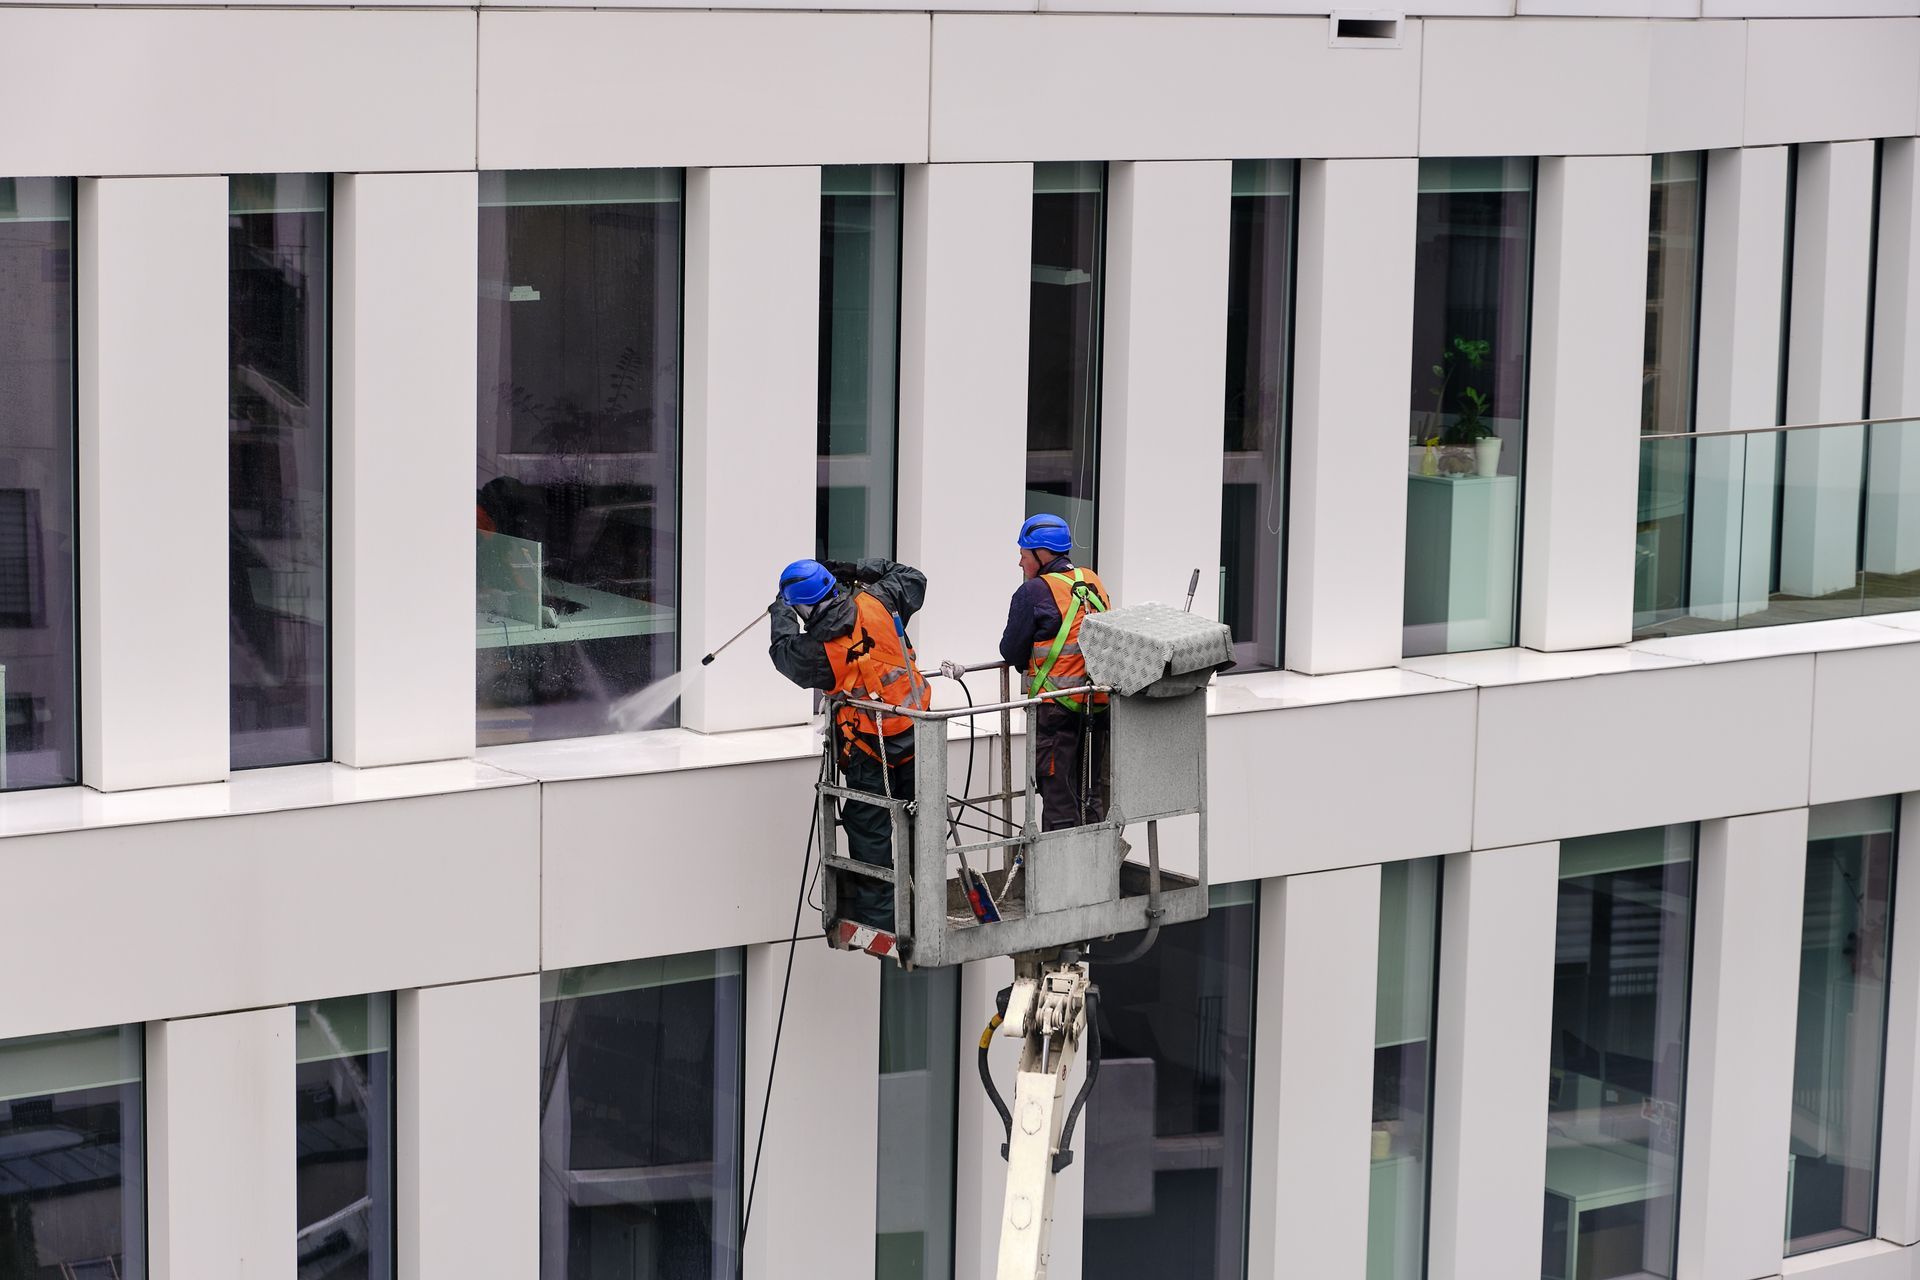 Two workers in safety harnesses power wash the exterior of a business building. They are standing in a crane cradle or aerial platform, utilizing a pressure washer and mops to clean the facade.